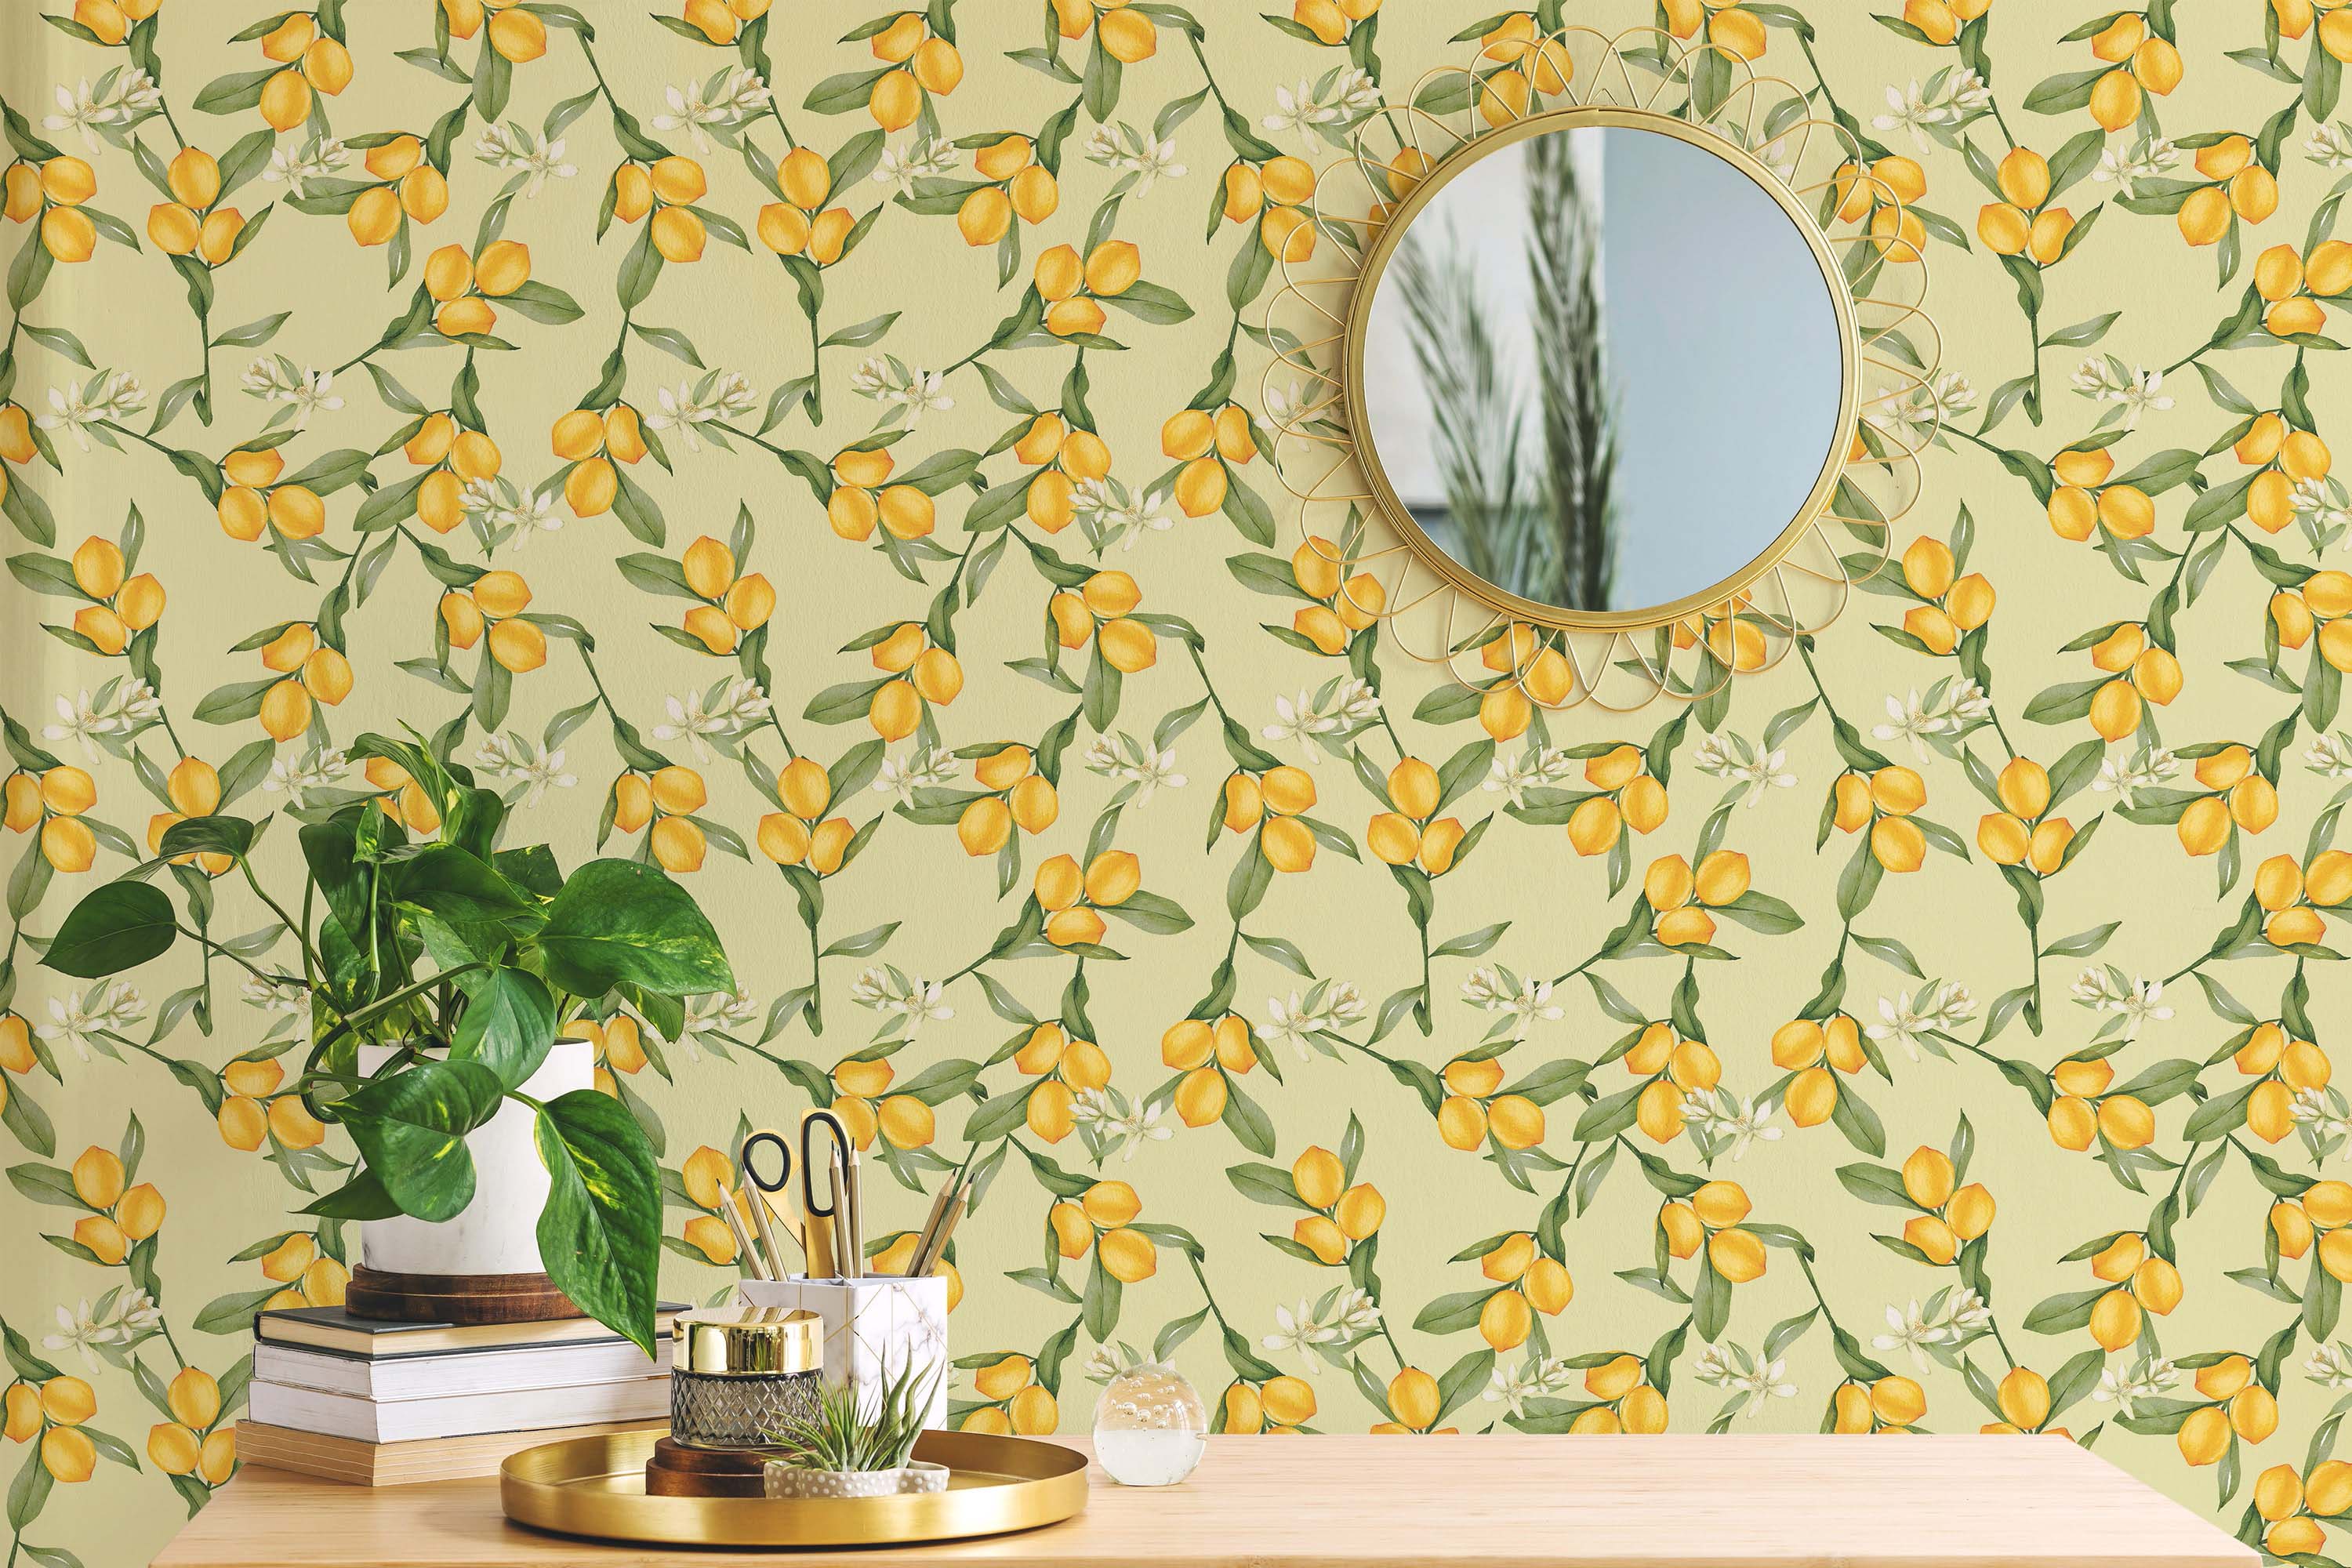 Lemon tree wallpaper - Peel and Stick or Traditional